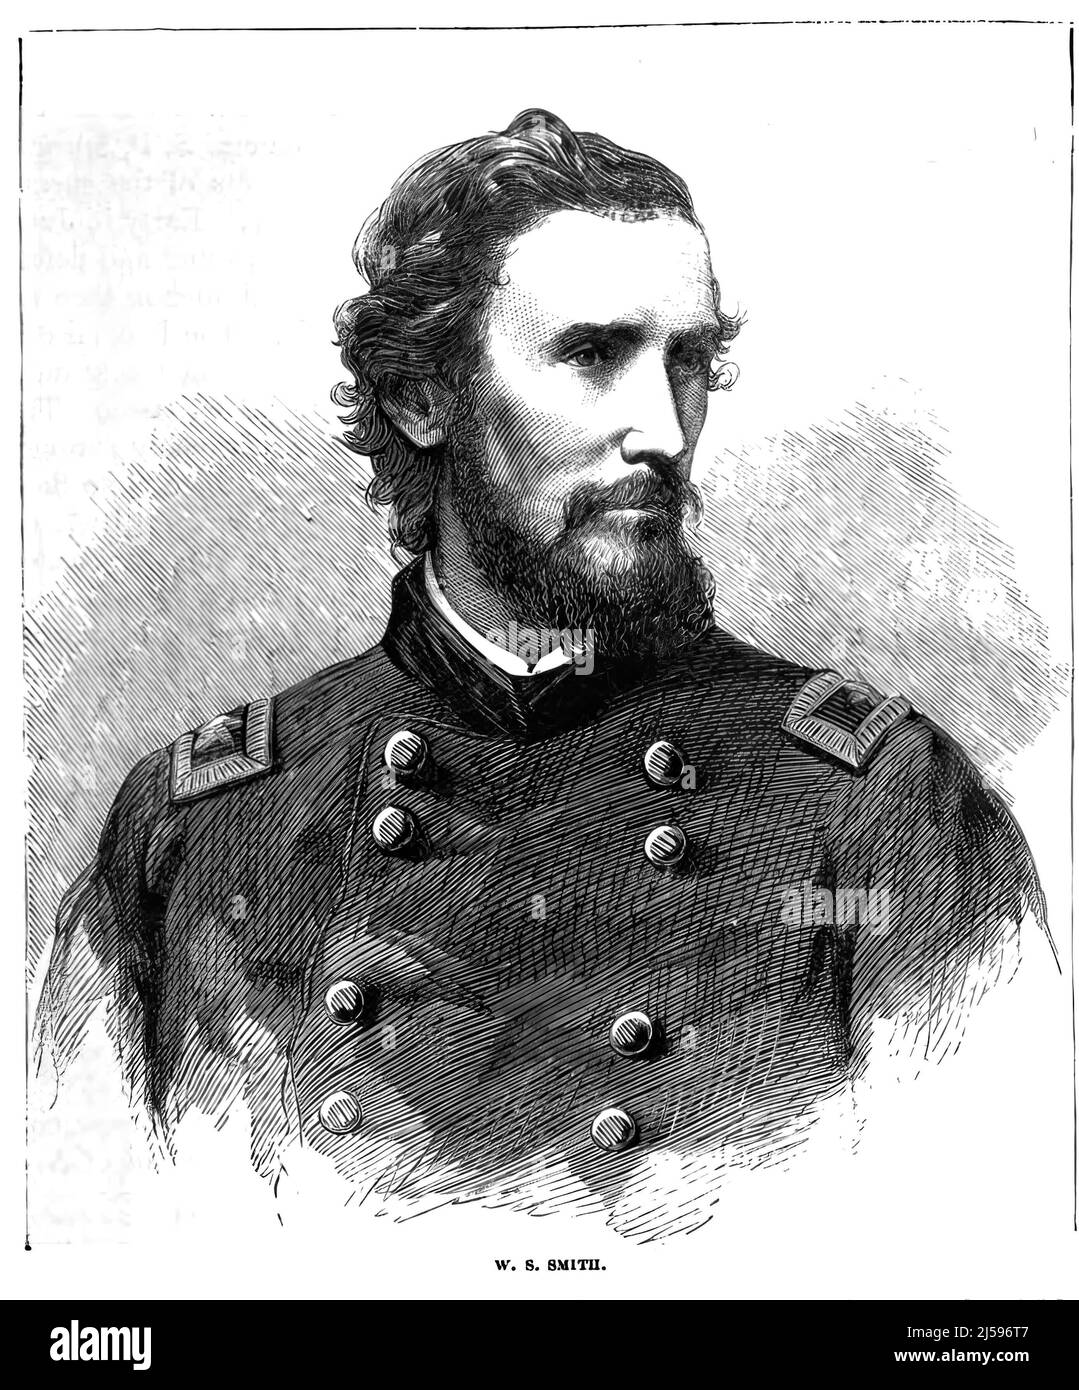 Portrait of William Sooy Smith, Union Army Brigadier General in the American Civil War. 19th century illustration Stock Photo